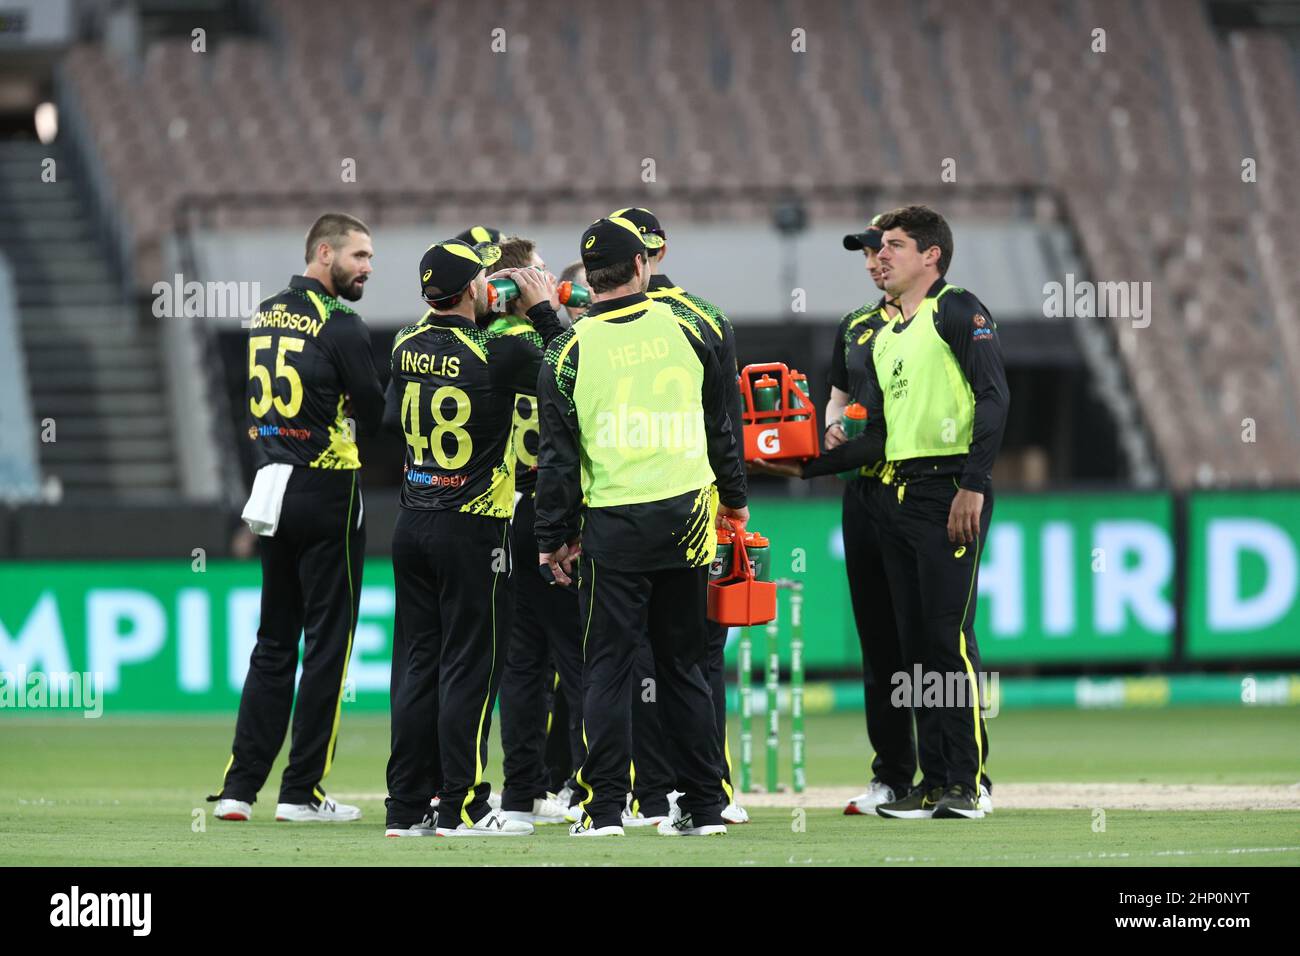 MELBOURNE, AUSTRALIA - FEBRUARY 18: Players from the Australian team  celebrate the wicket during game four of the T20 International Series  between Australia and Sri Lanka at the Melbourne Cricket Ground on